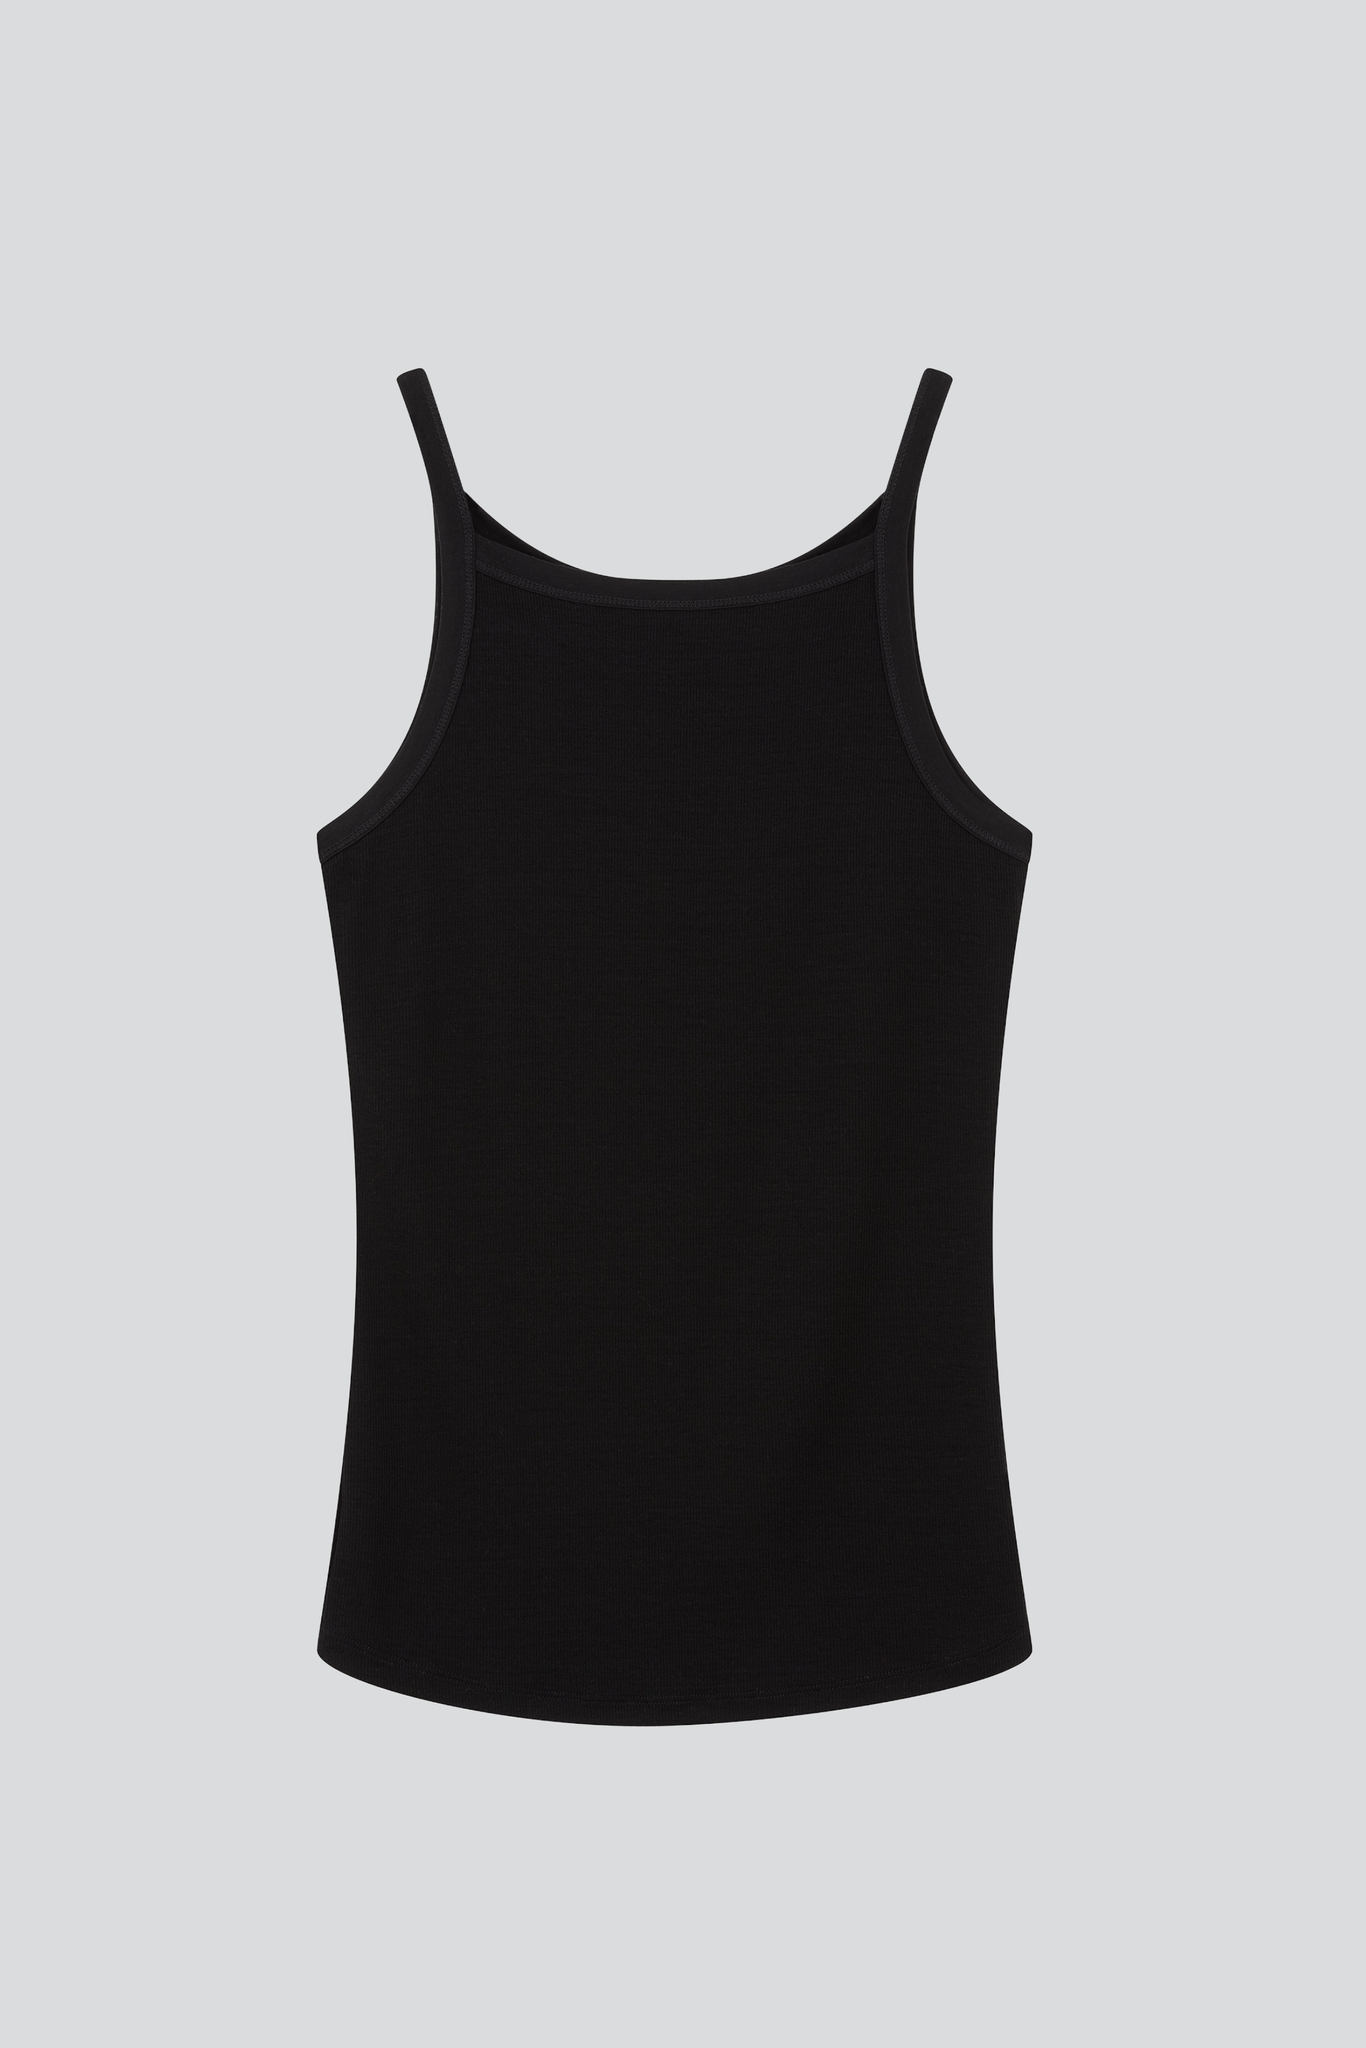 Womens Sleeveless High Neck Tank Top by Lavender Hill Clothing